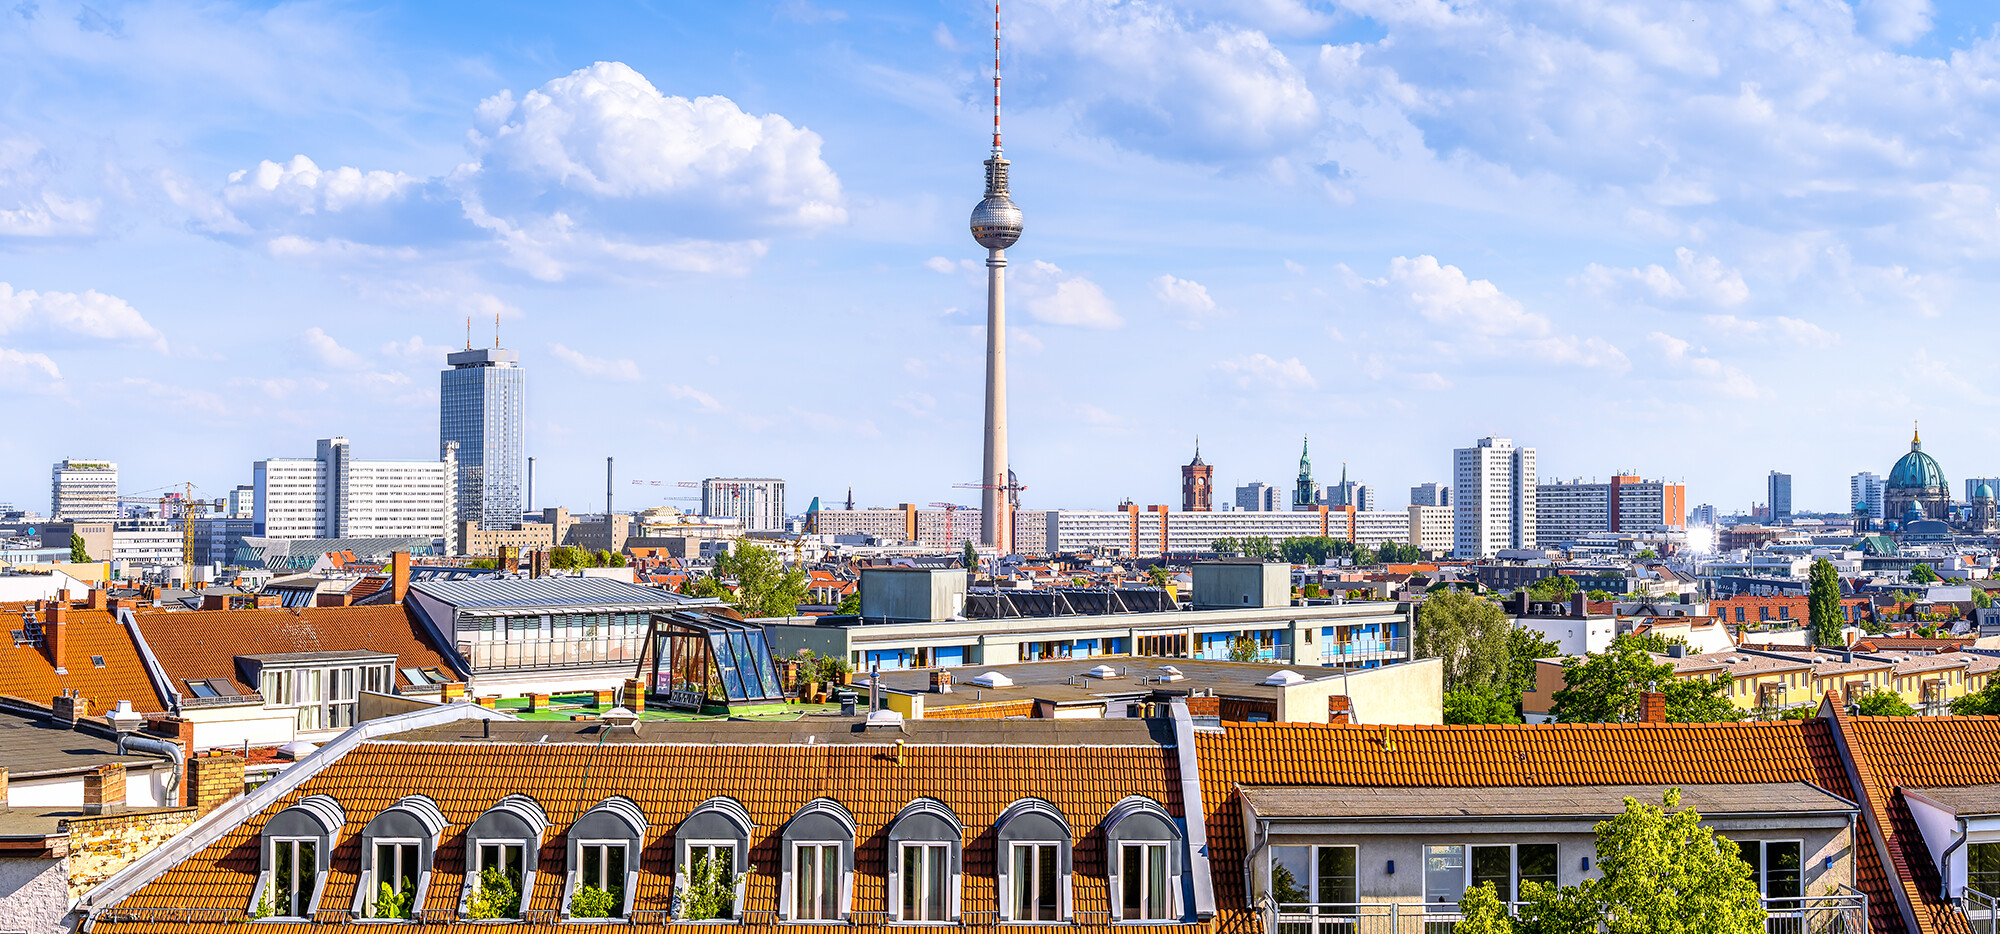 While the cost of living has risen in recent years, in comparison to other capital cities, Berlin is still quite affordable.